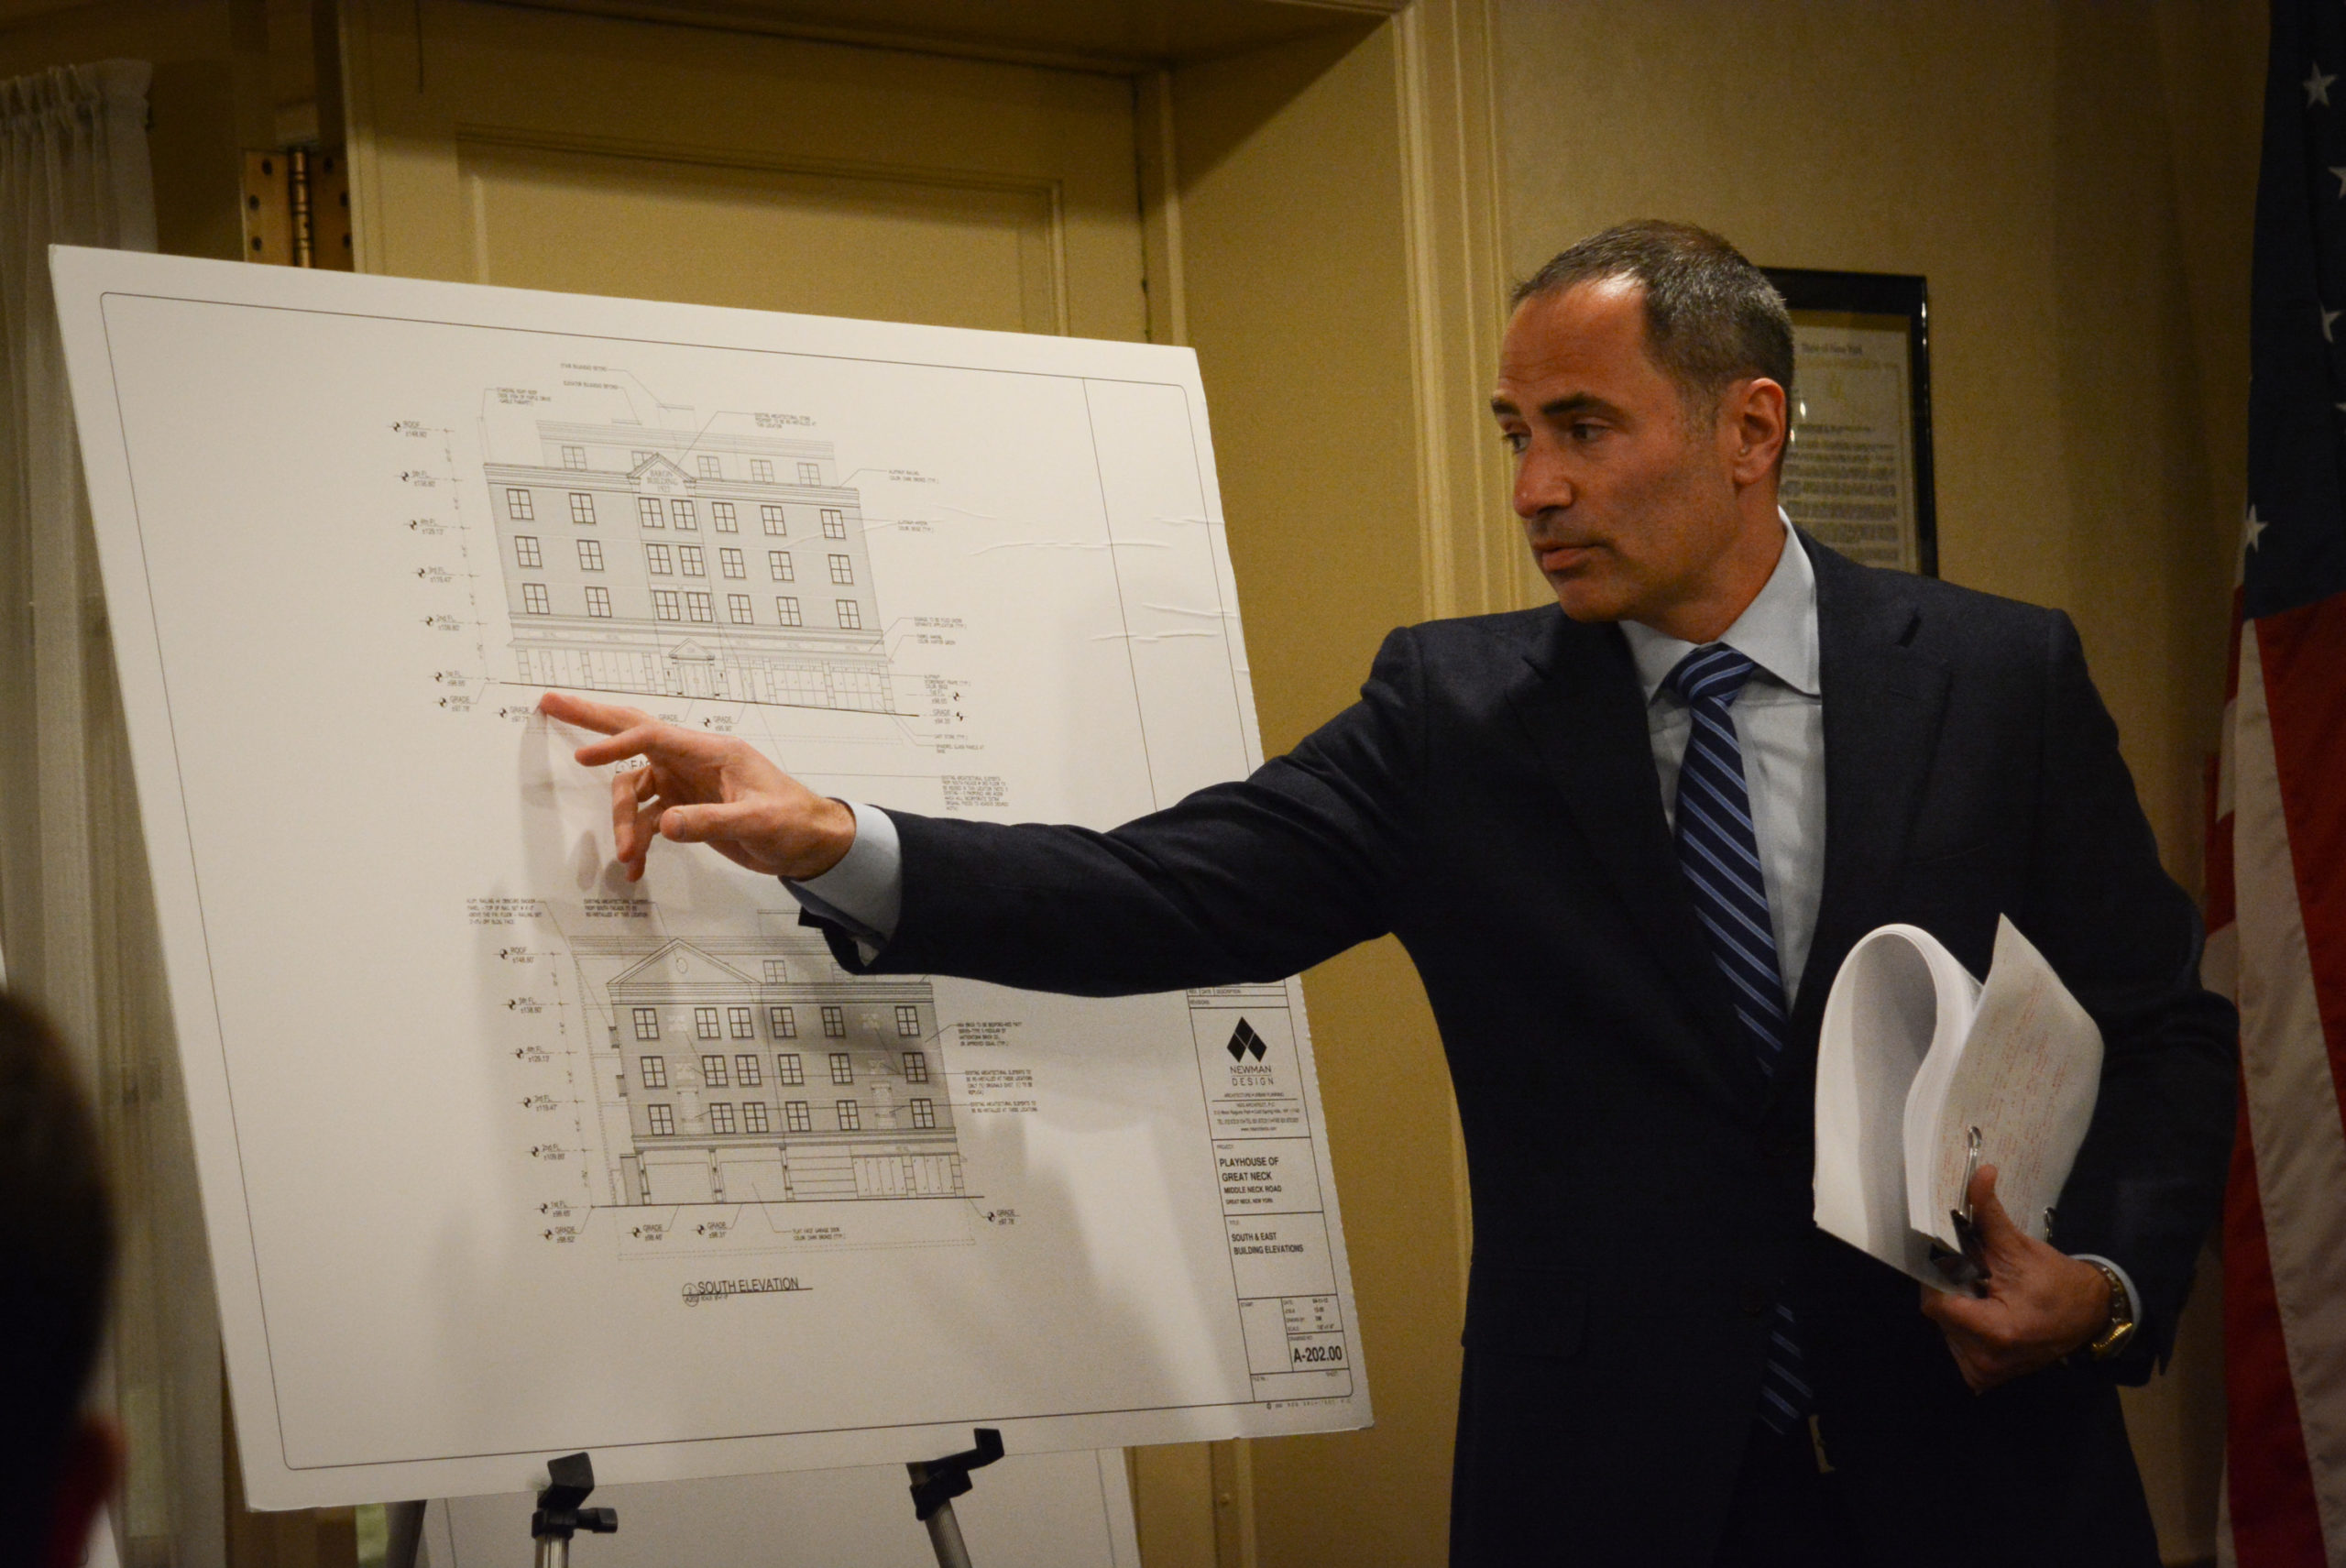 Sean Mulryan, the head of Mulryan Engineering, outlines the phases of the project and how they plan to mitigate its impact. (Photo by Janelle Clausen)